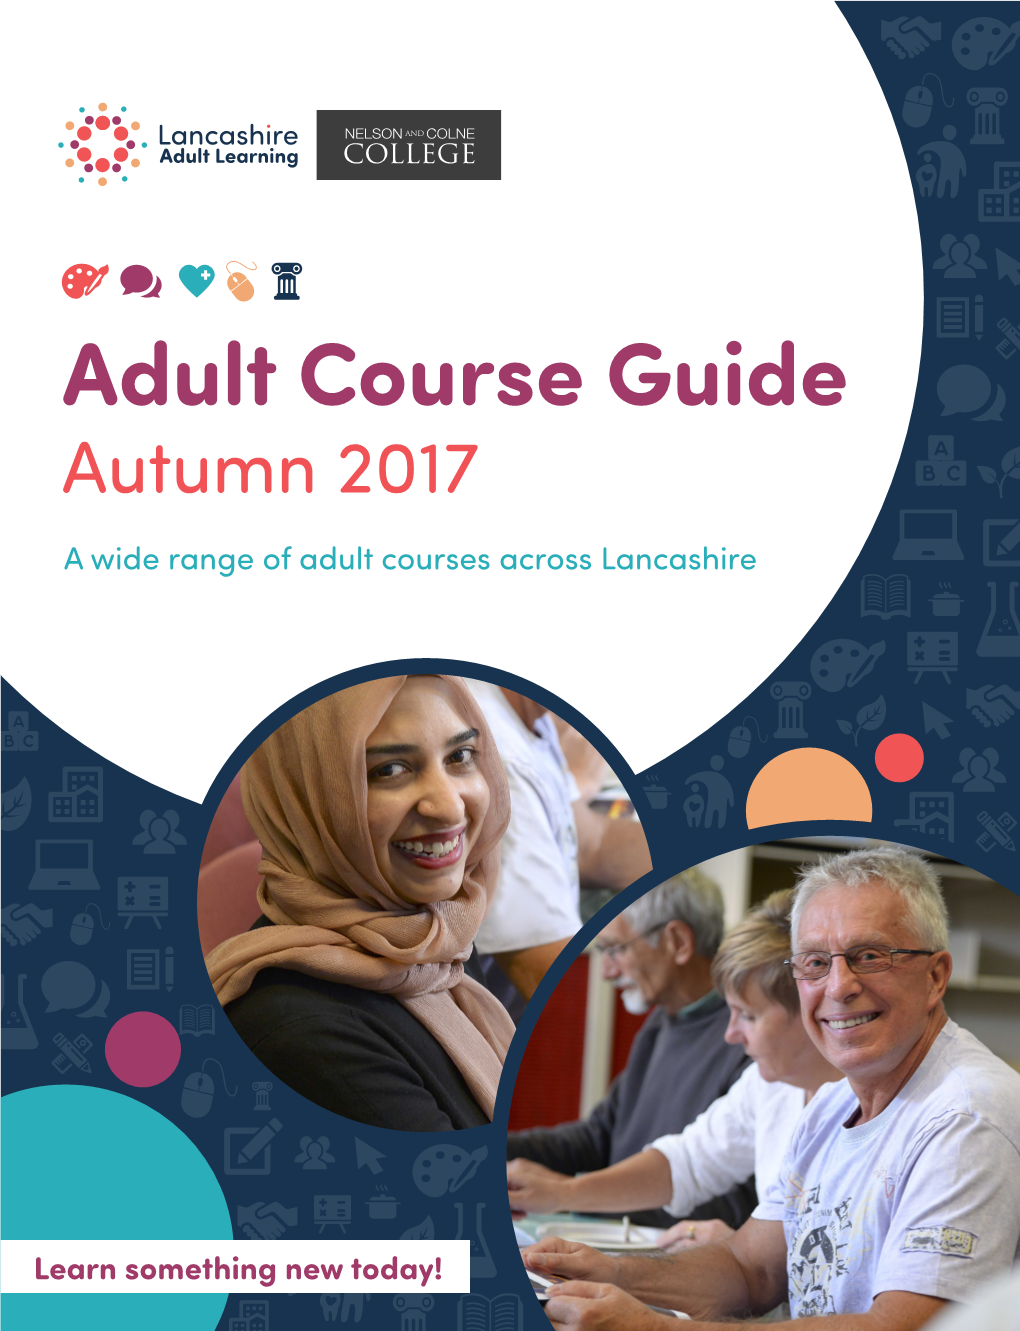 Adult Course Guide Autumn 2017